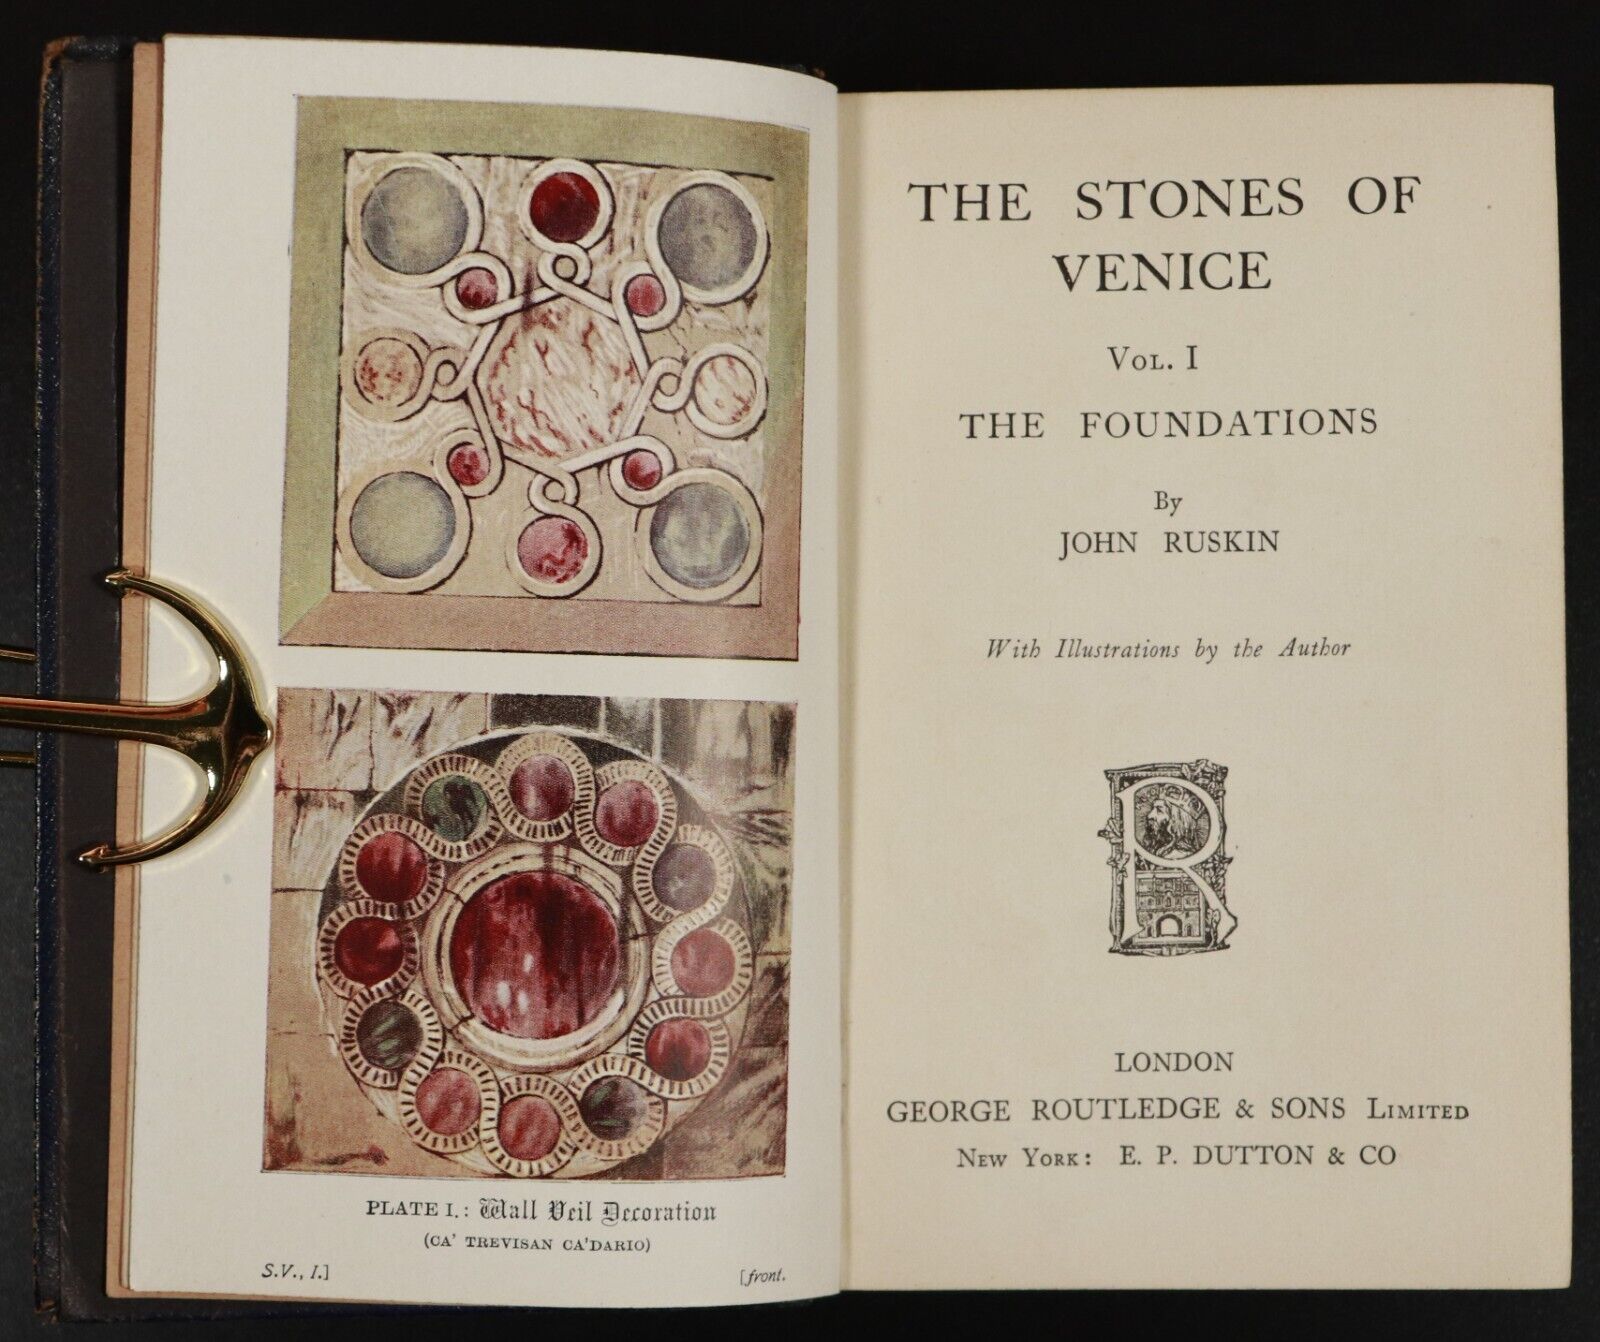 c1910 The Stones Of Venice Vol 1 by John Ruskin Antique Architecture Book - 0